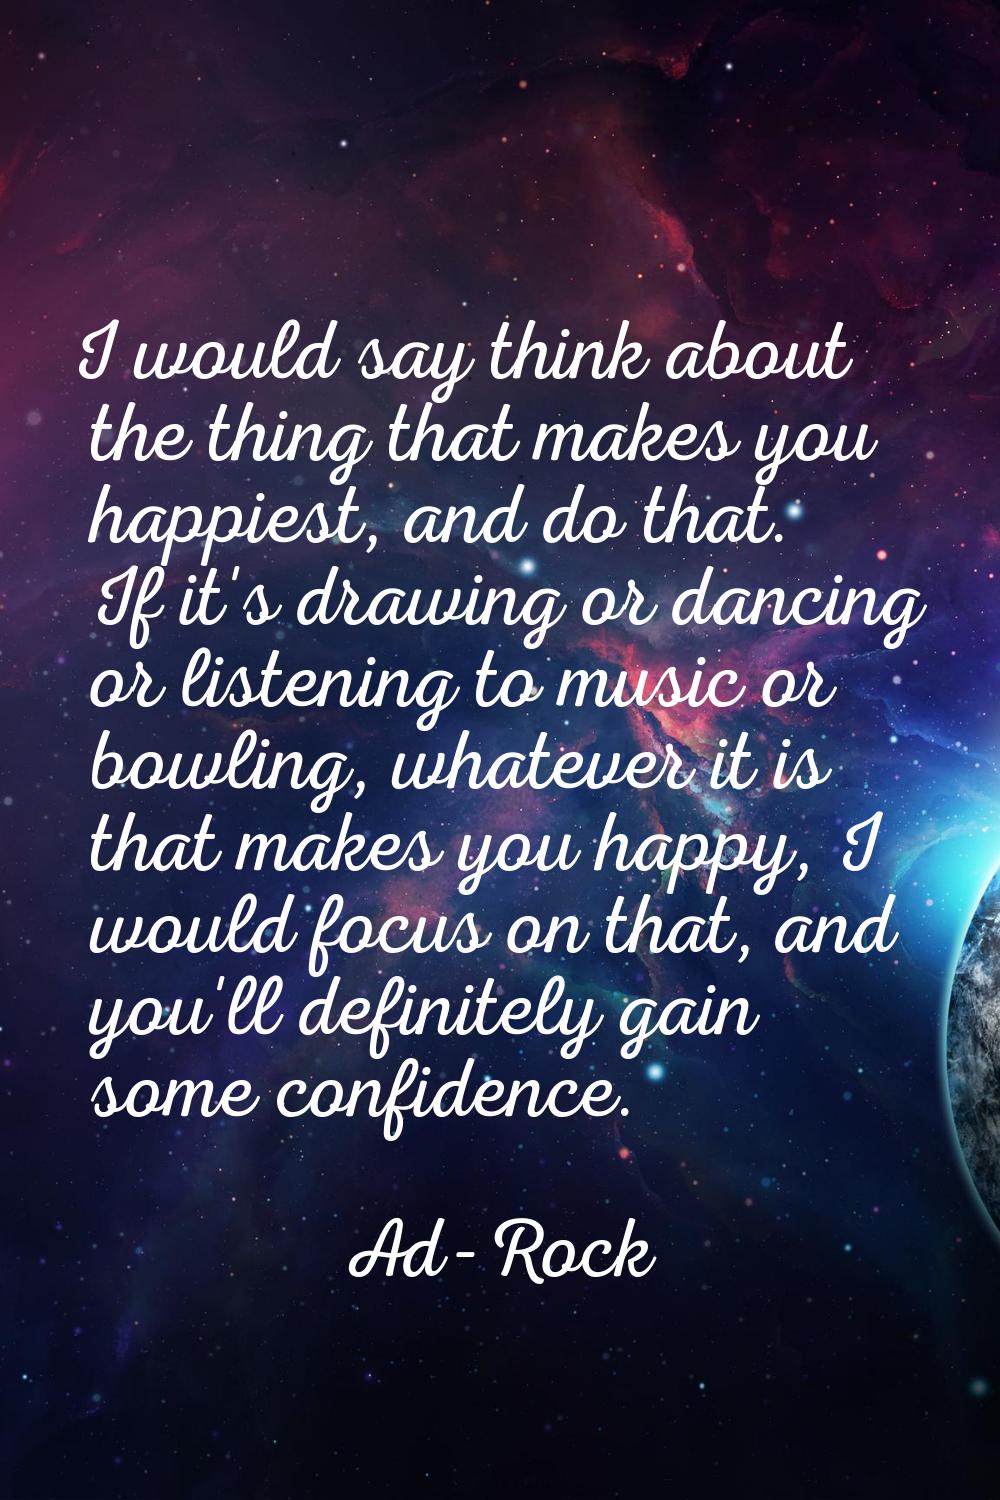 I would say think about the thing that makes you happiest, and do that. If it's drawing or dancing 